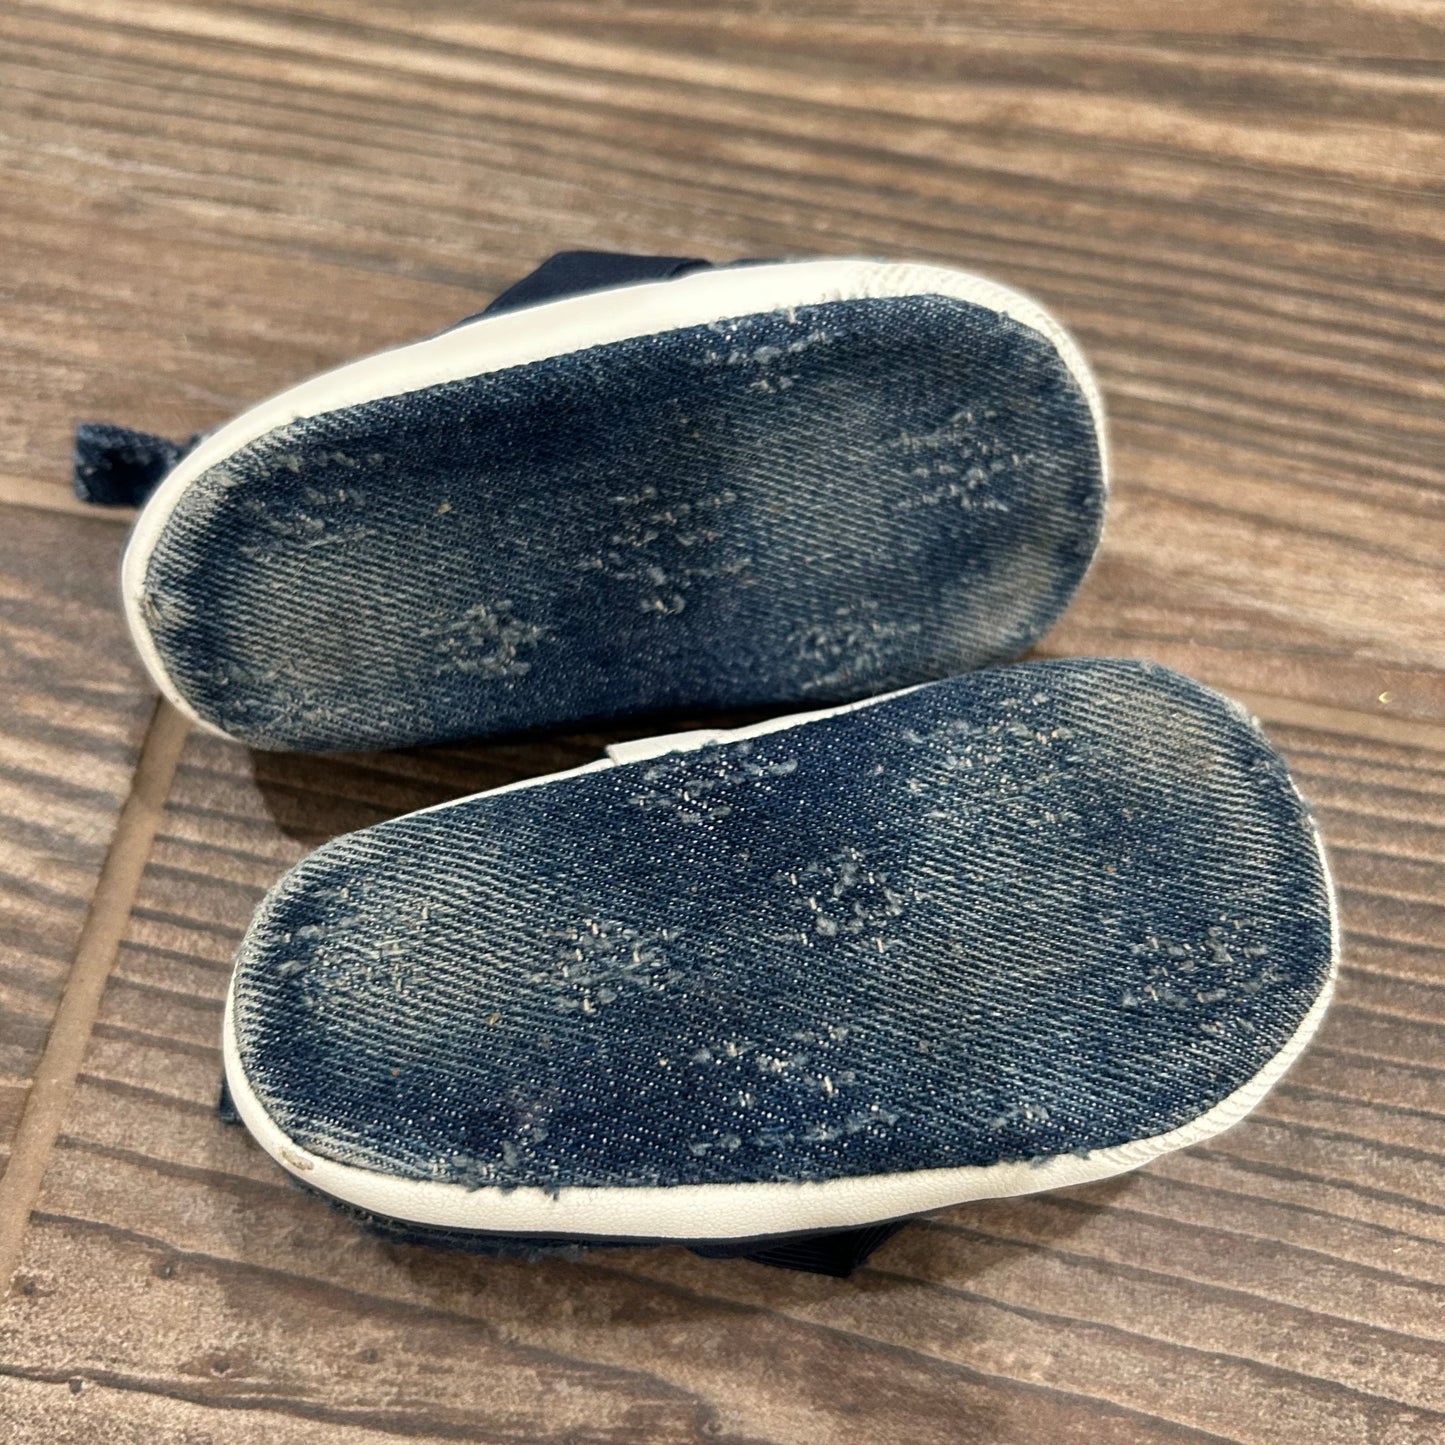 Size 3 (Infant) Distressed Star Denim Slip On Shoes - Good Used Condition